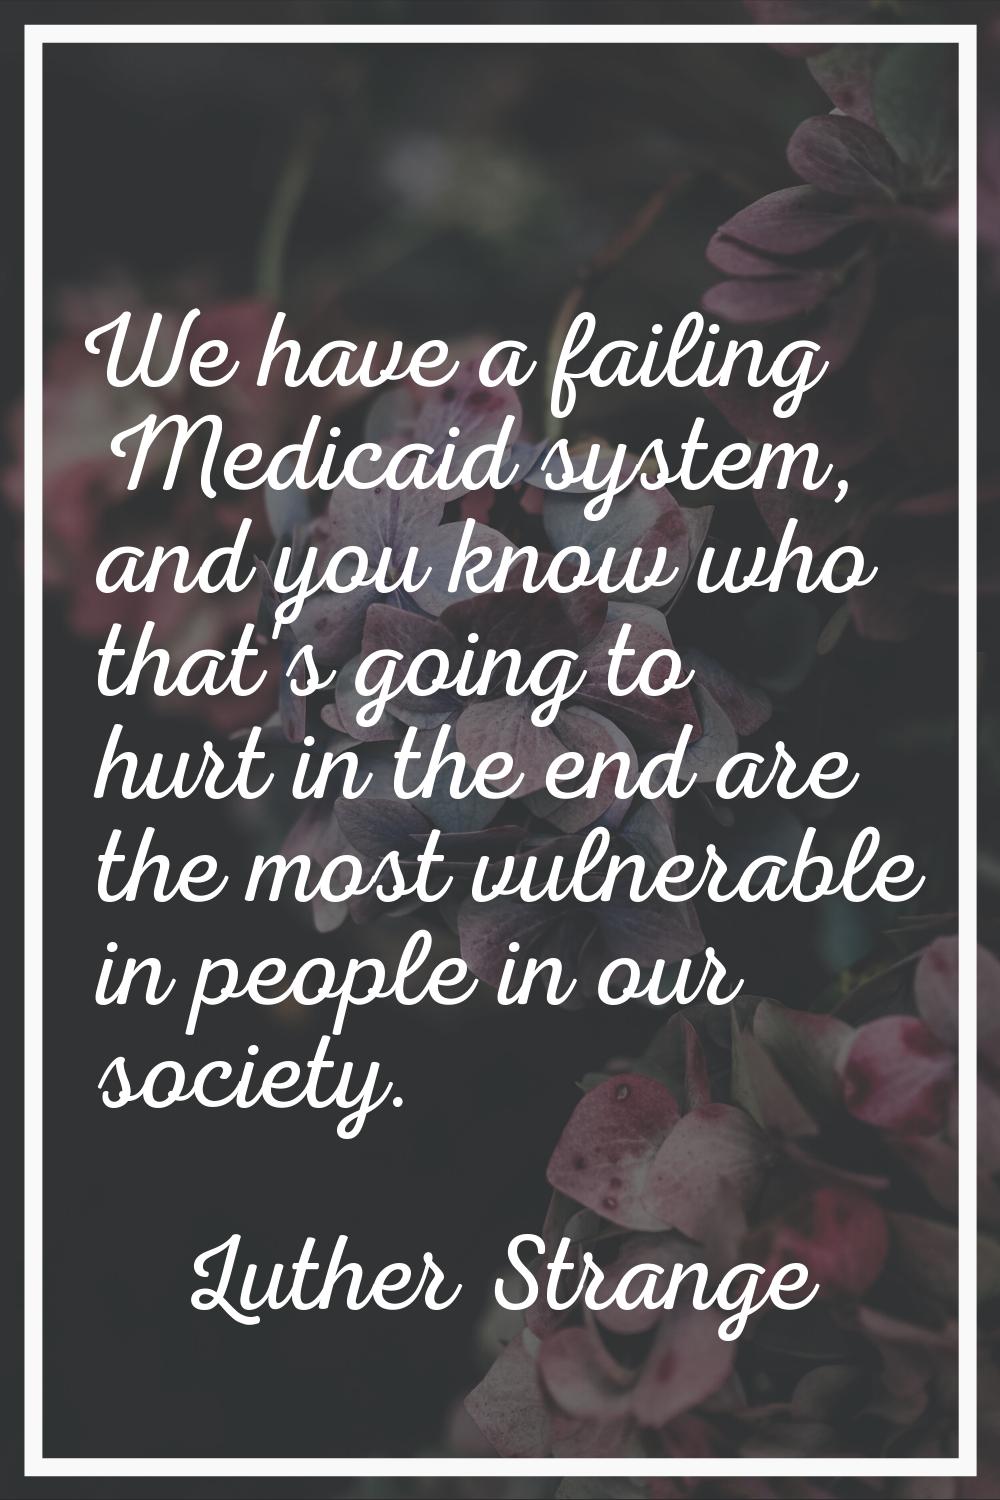 We have a failing Medicaid system, and you know who that's going to hurt in the end are the most vu